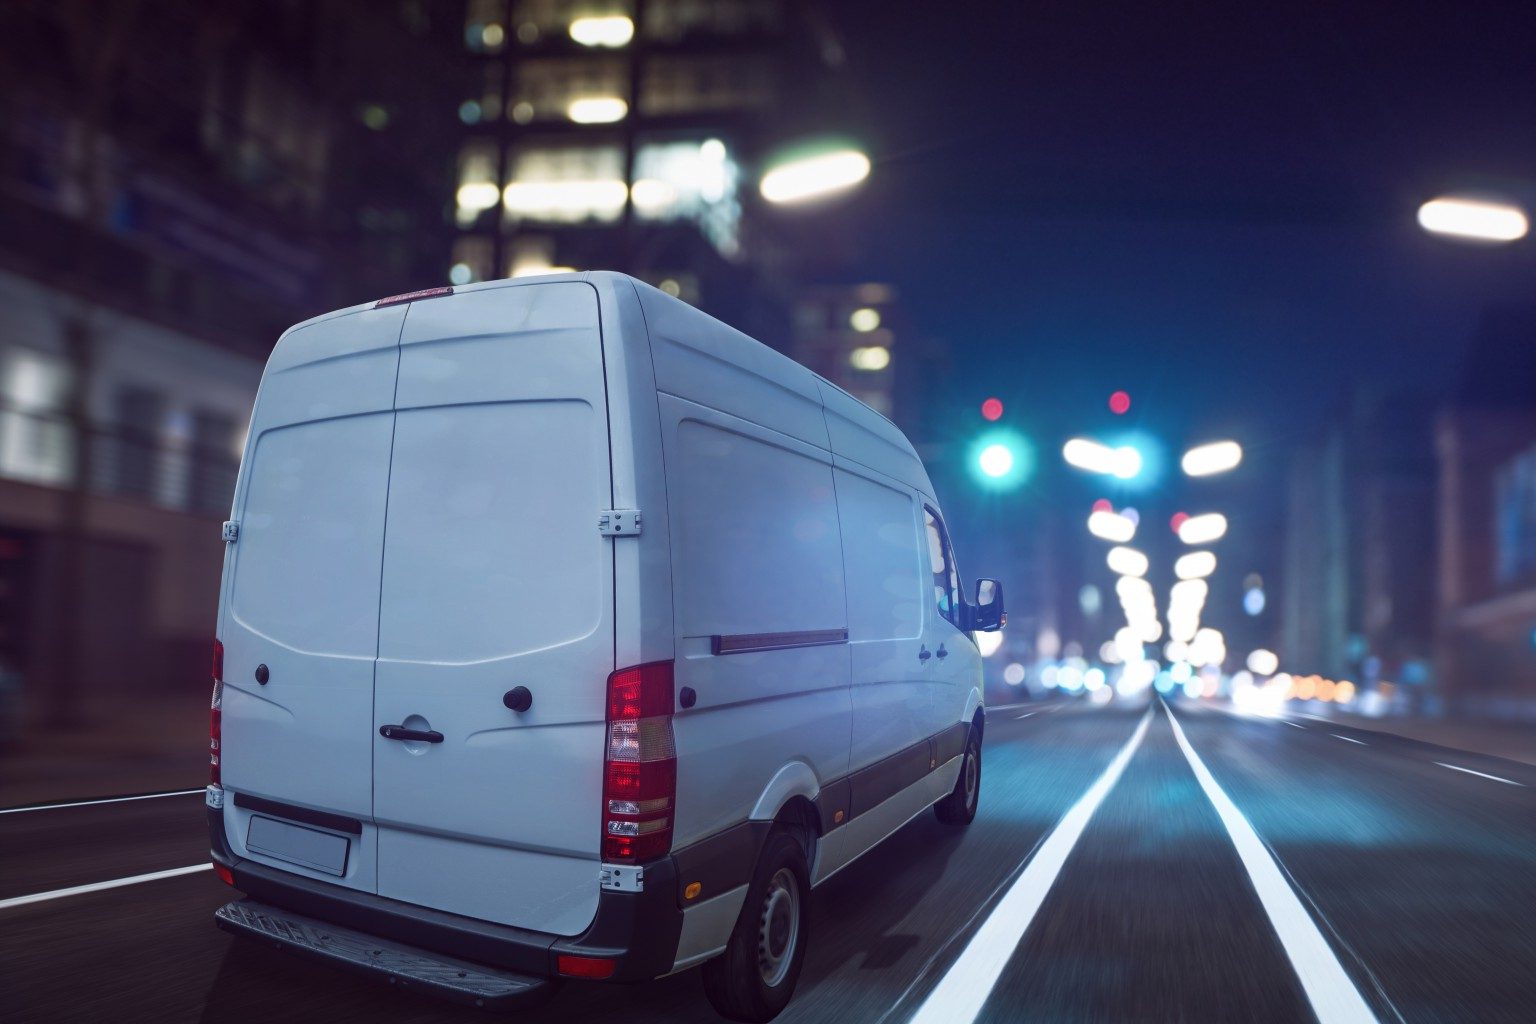 A white van on a city road at night